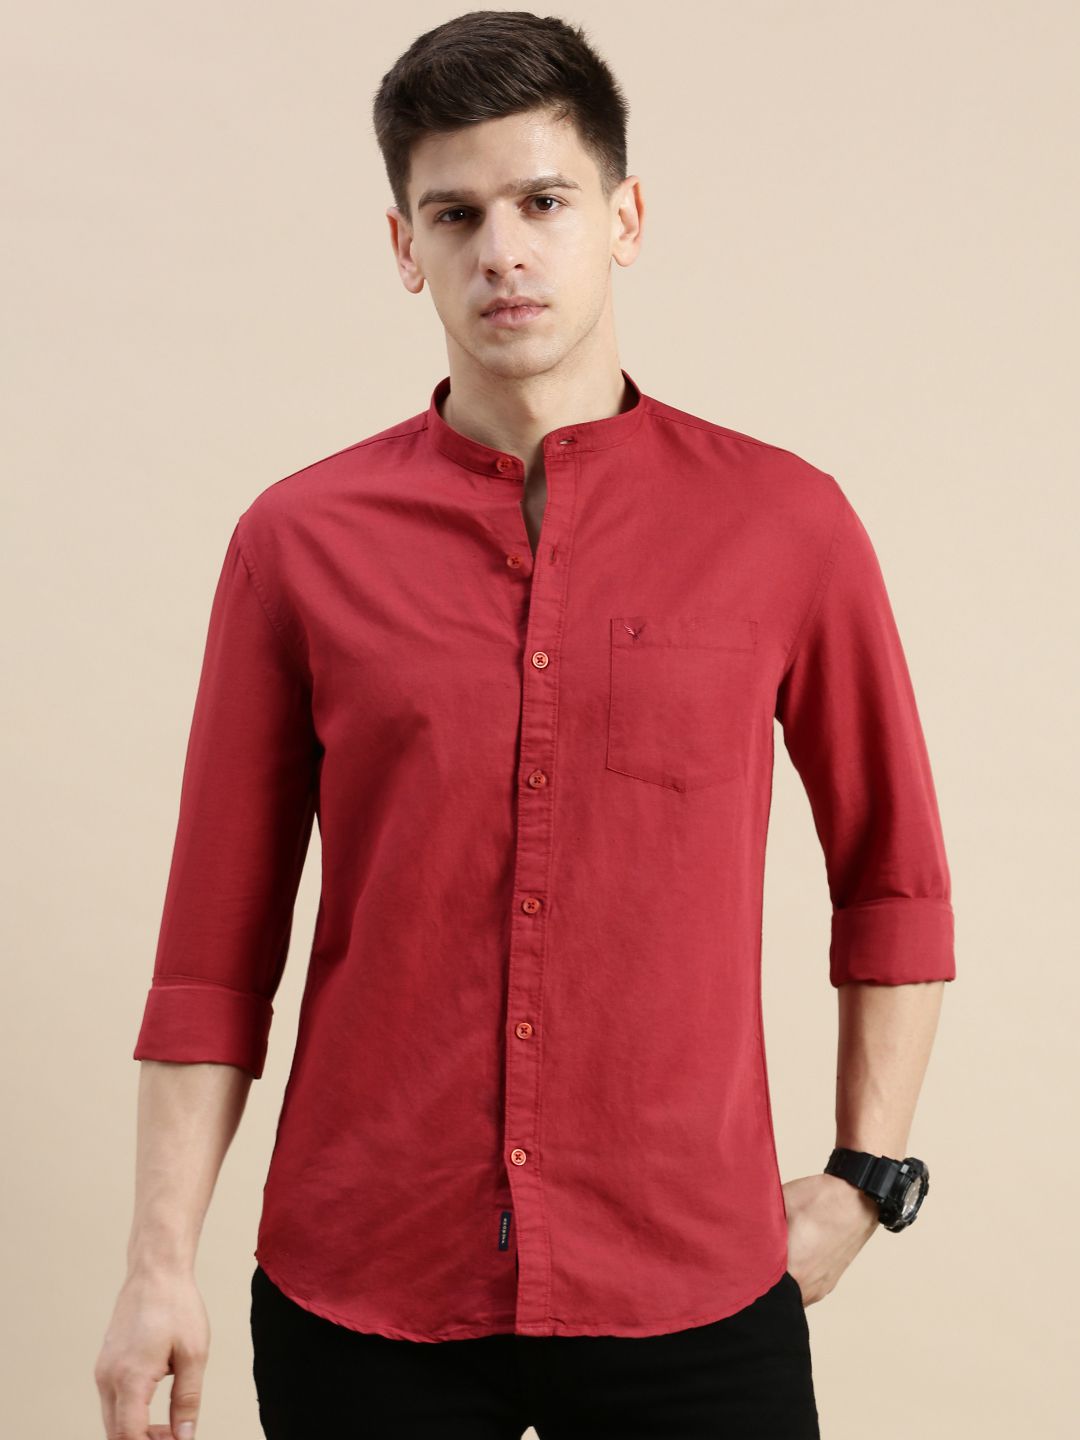     			Showoff Linen Regular Fit Solids Full Sleeves Men's Casual Shirt - Maroon ( Pack of 1 )